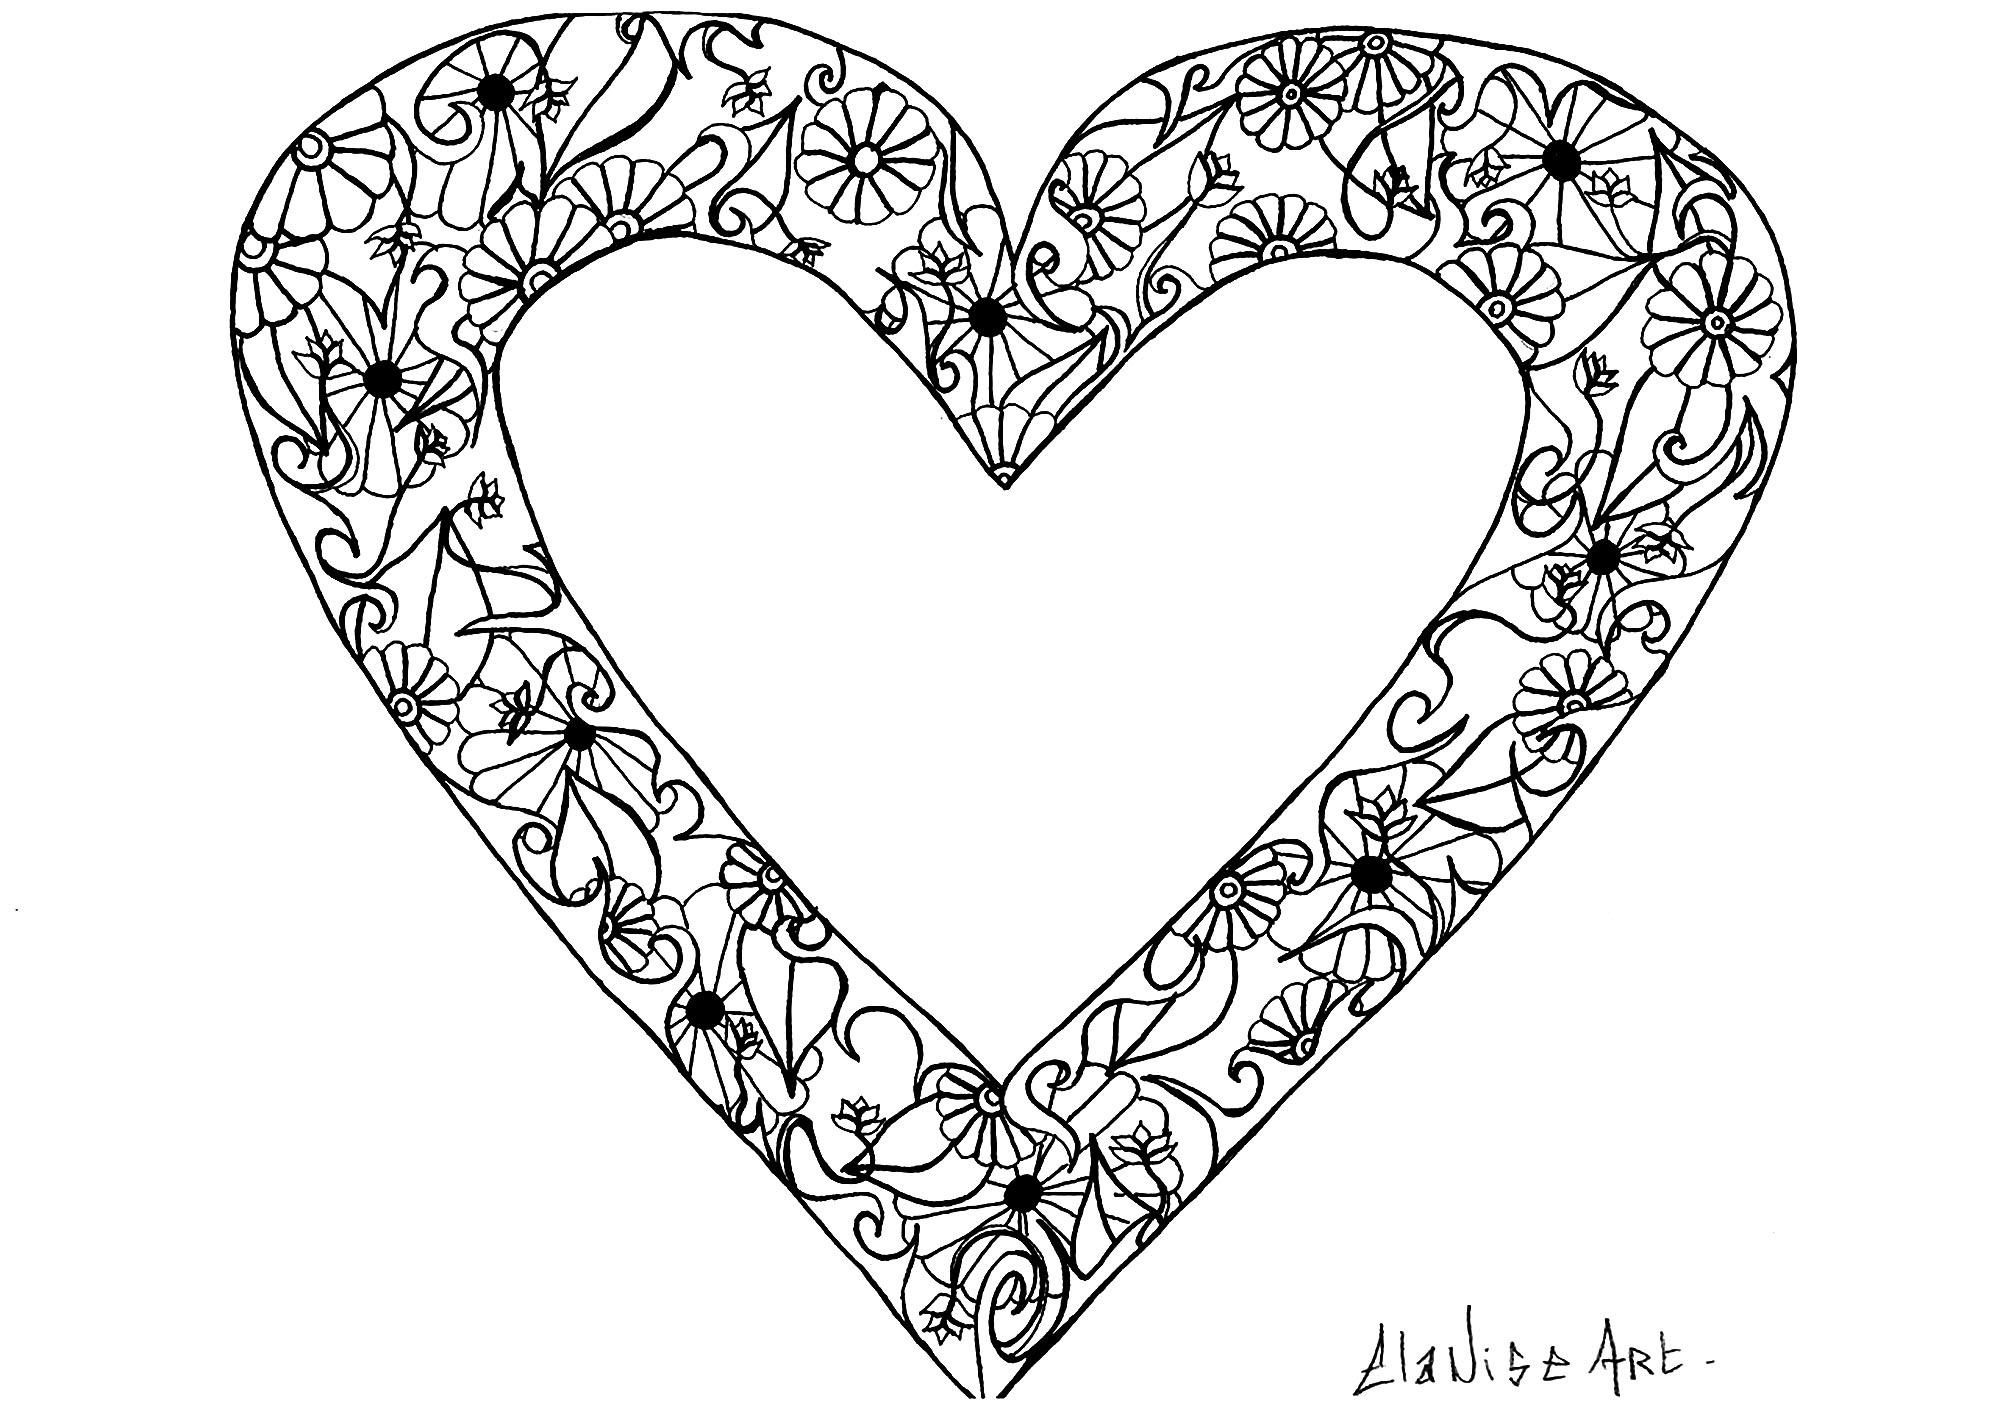 Cool drawing with an heart containing simple flowers and leaves, Artist : Elanise Art